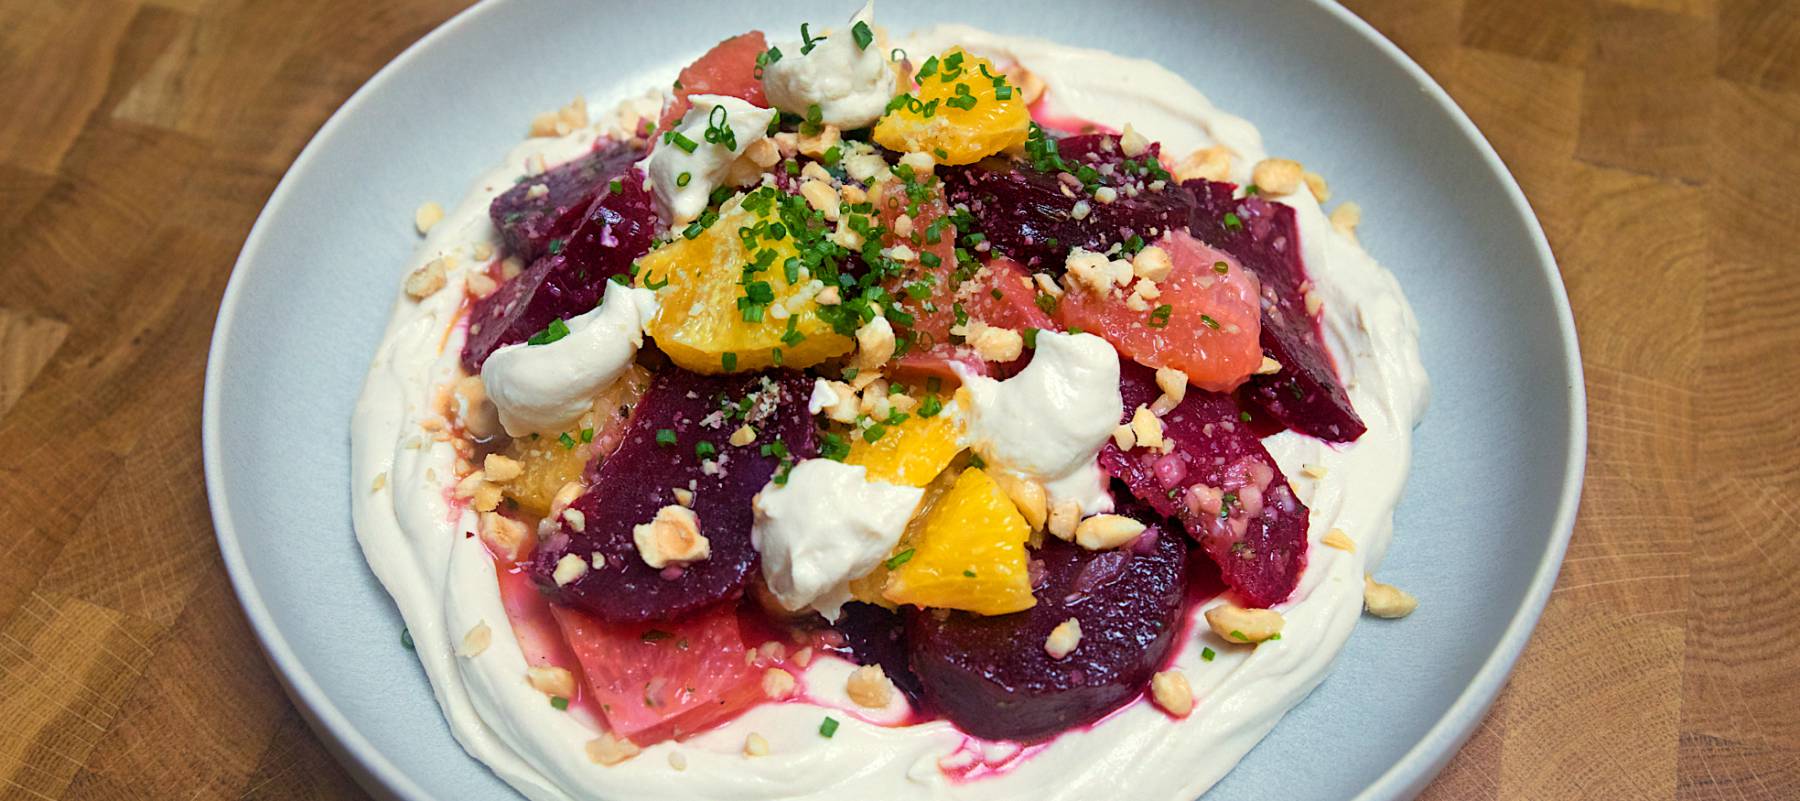 Beetroot and citrus salad with whipped tofu